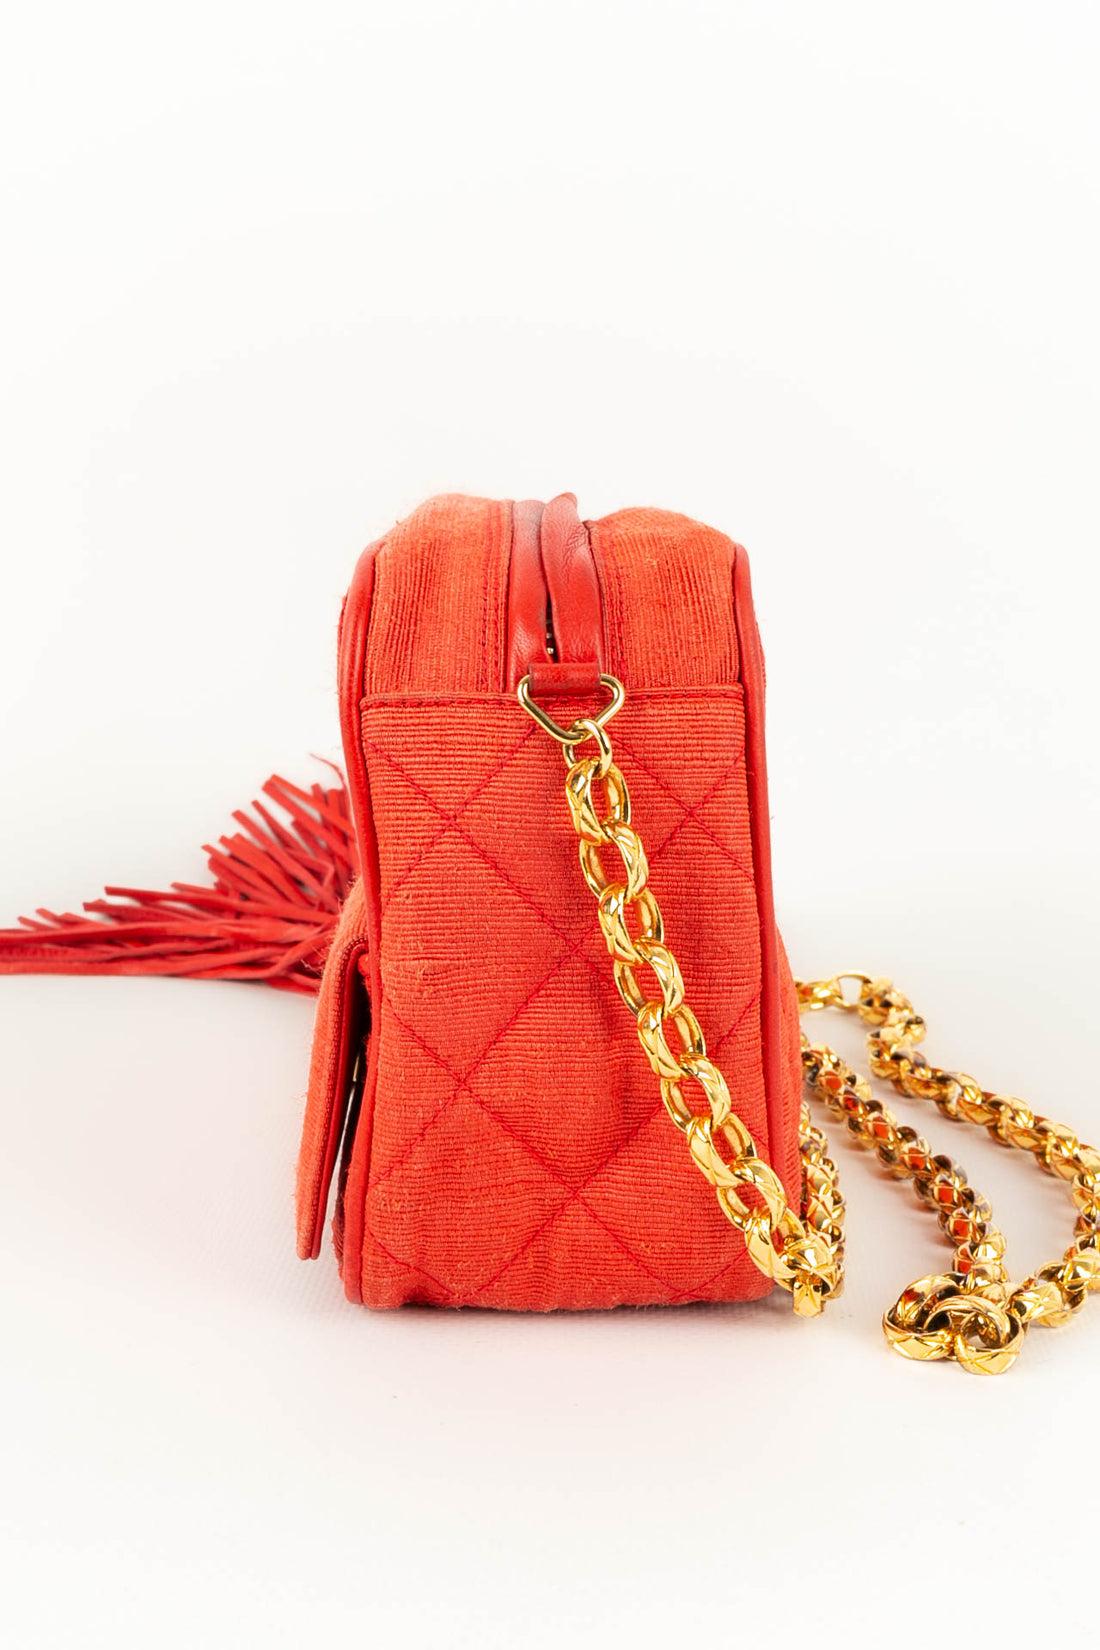 Chanel - (Made in France) Bag in red quilted cotton and gold metal attributes. 
Serial number present. Collection 1989/1991.

Additional information: 
Dimensions: 
Length : 19 cm, Height : 13 cm, Depth : 7.5 cm, Handle : 110 cm

Condition: Good